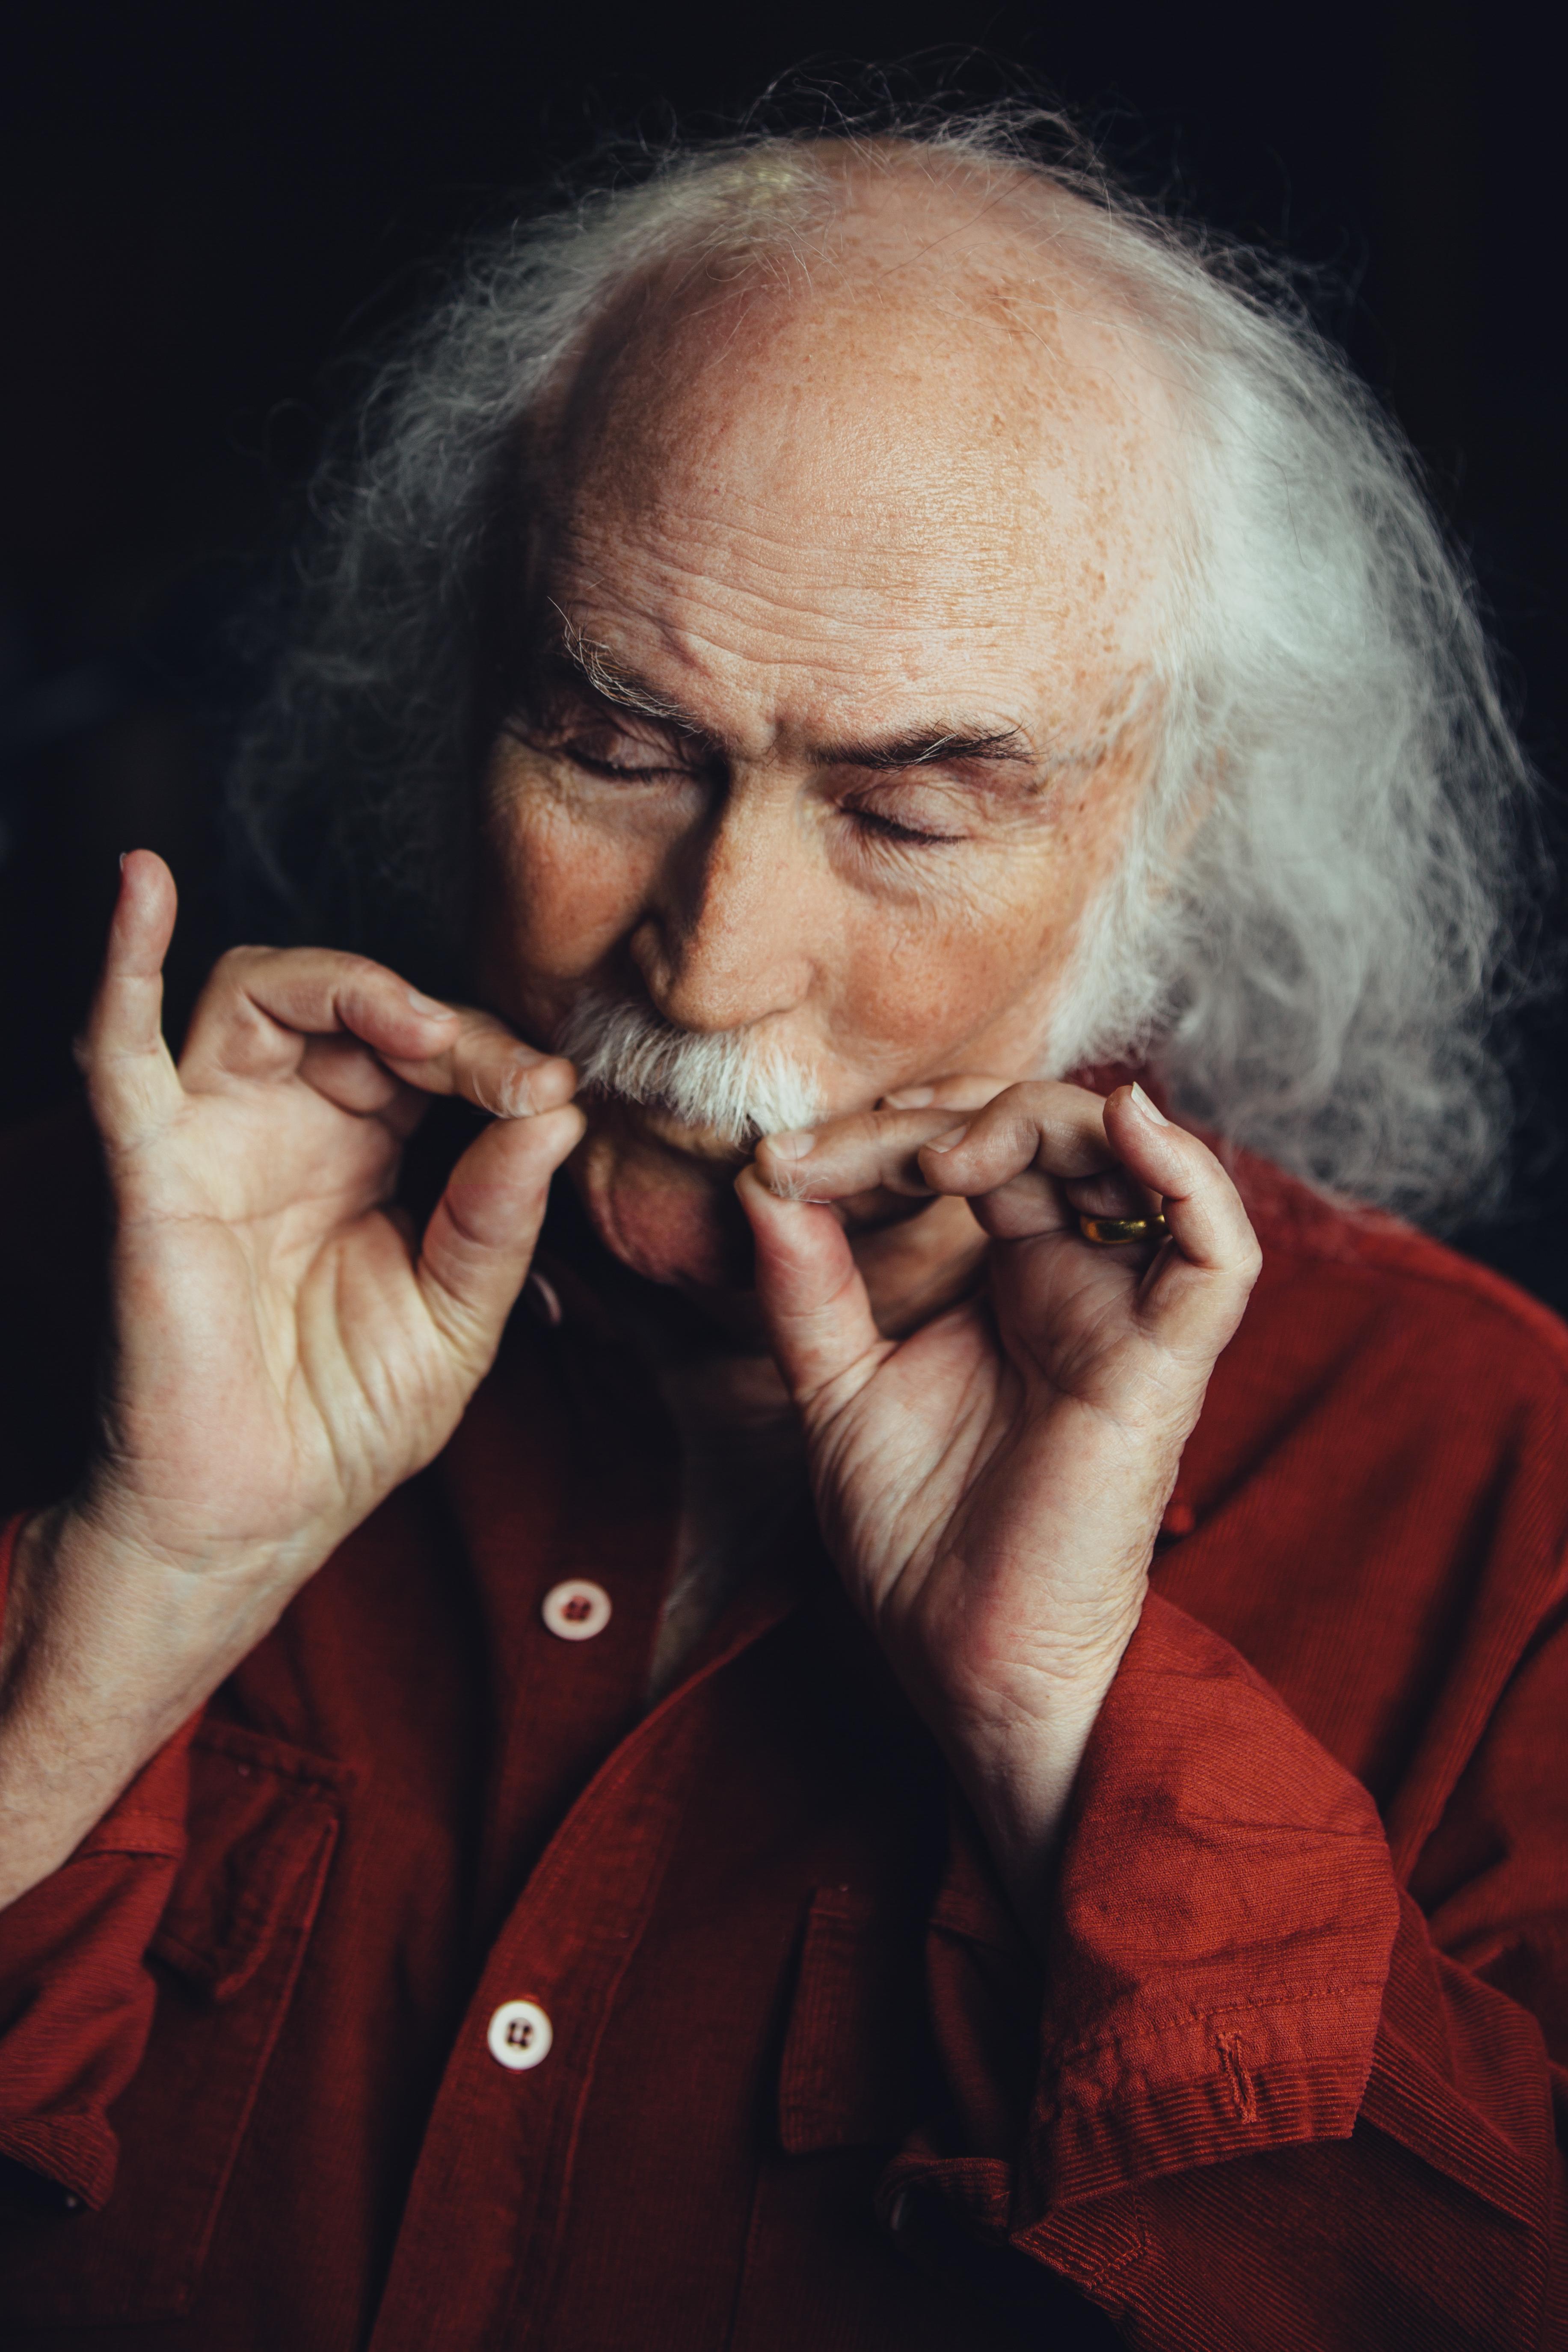 David Crosby, The Troubadour, Los Angeles, CA, Music Photography, Signed